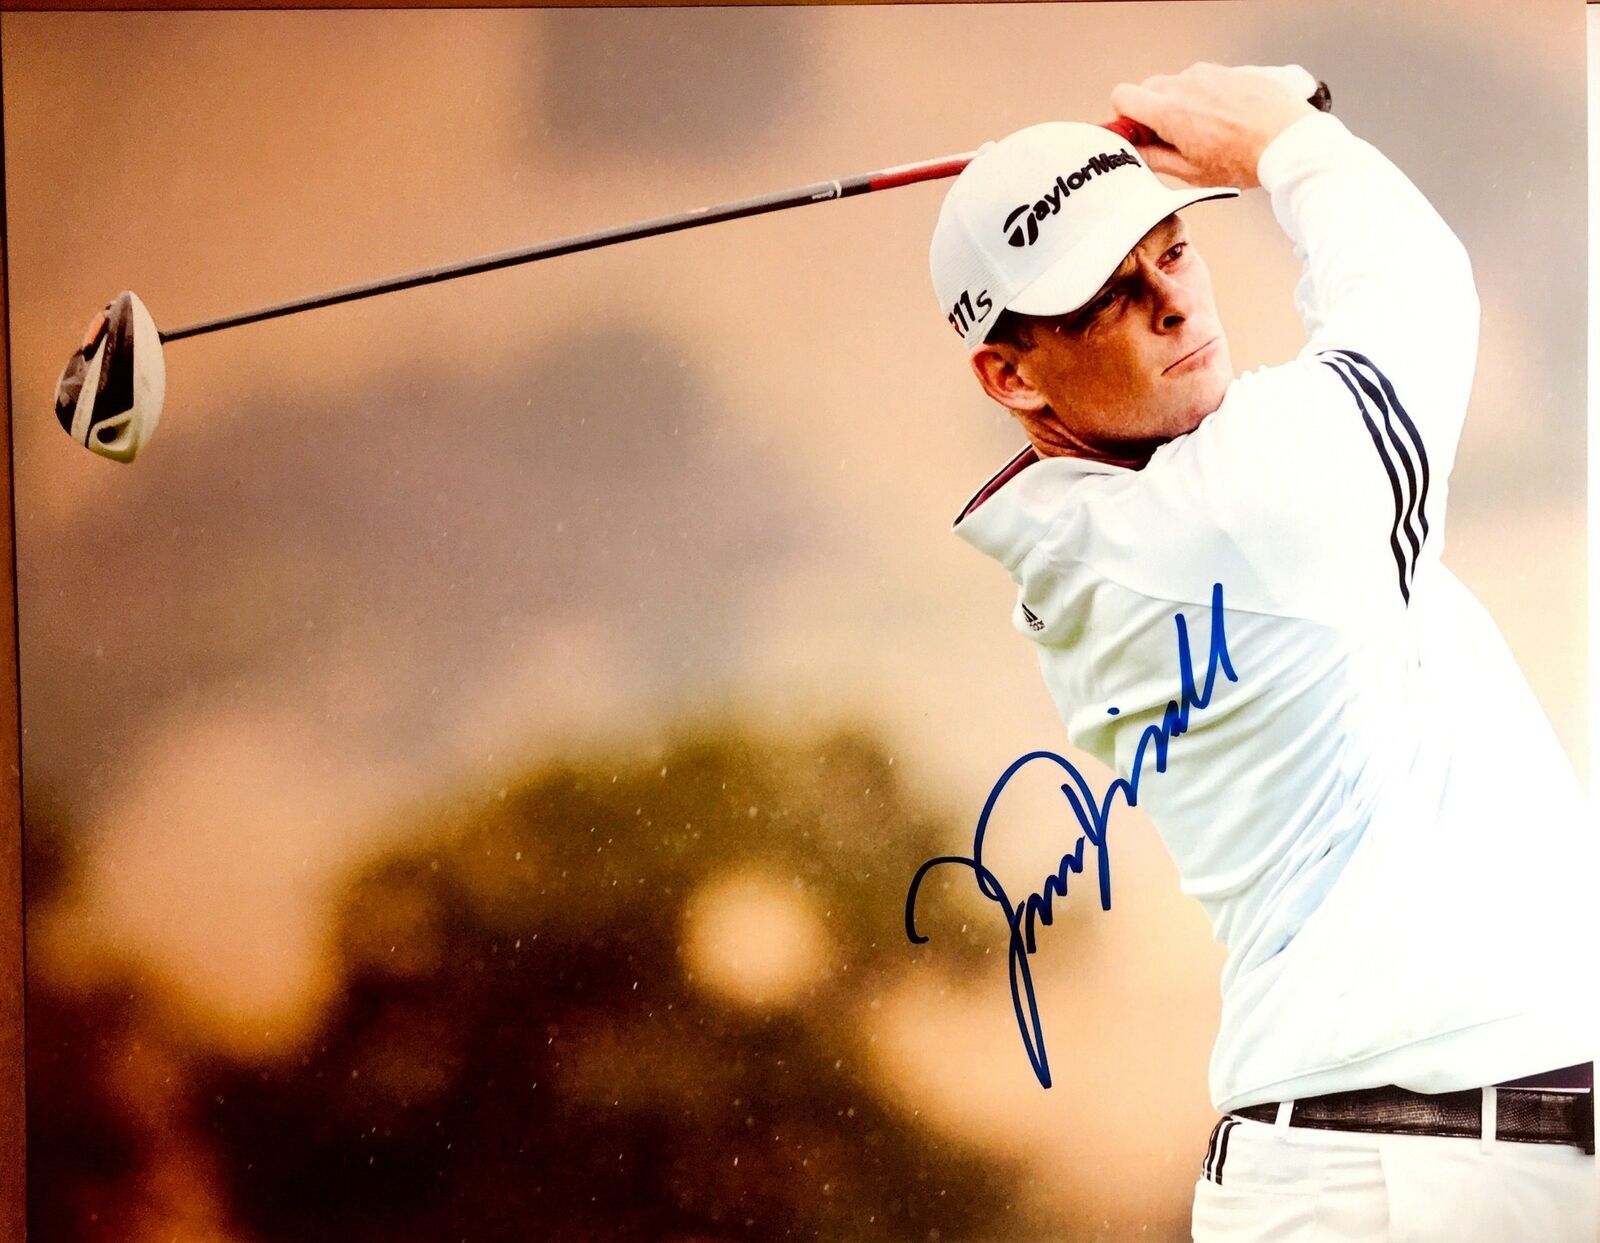 James Driscoll Signed 8x10 Photo Poster painting PGA Tour Golfer Golf Masters Autograph Auto